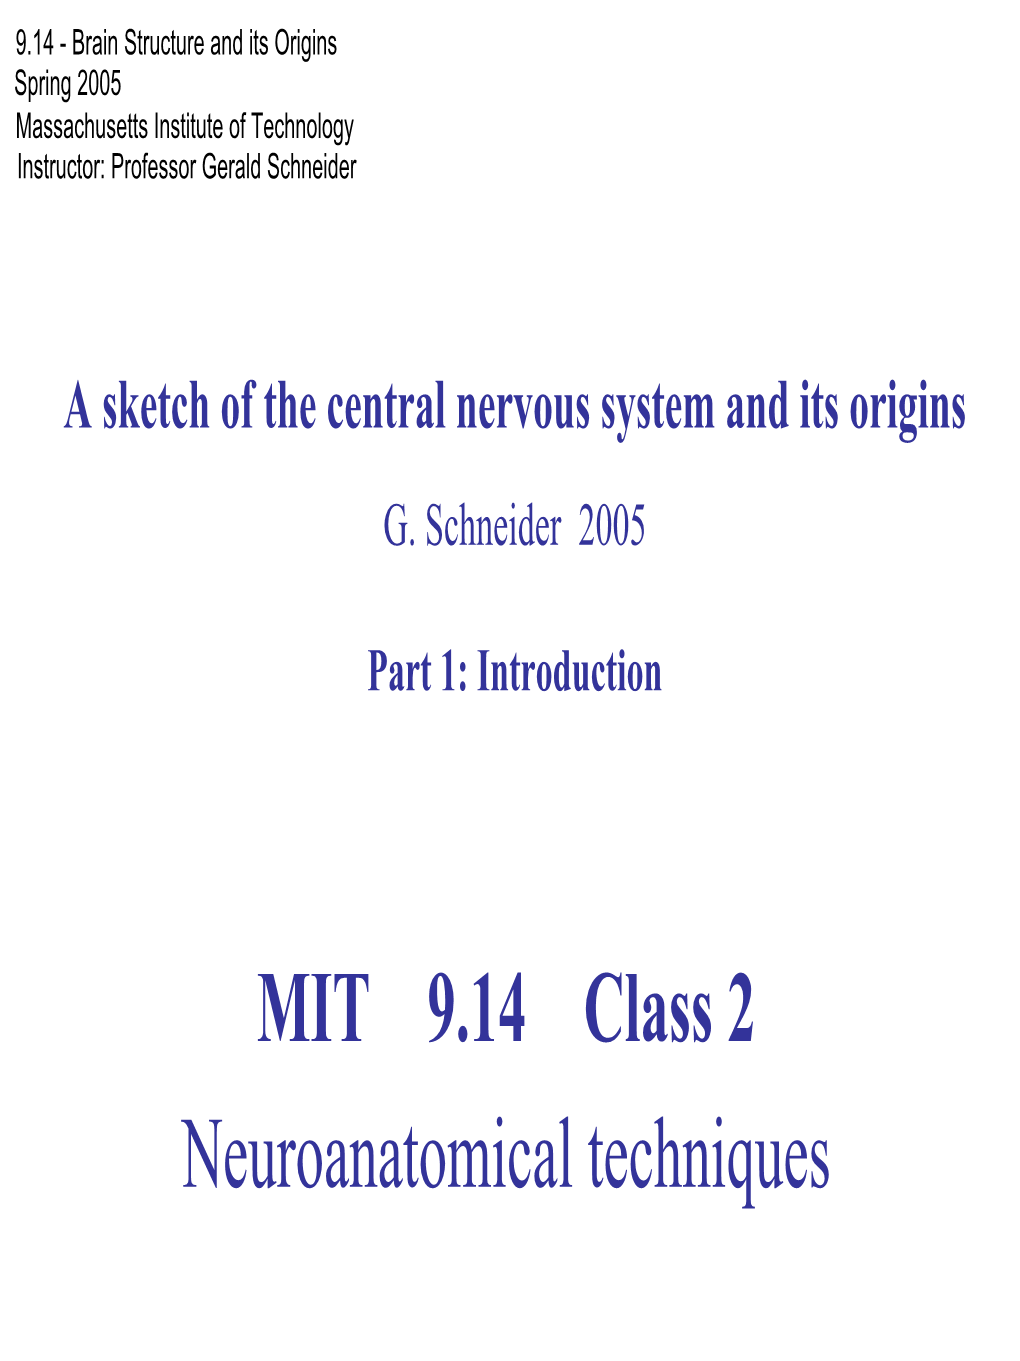 Introduction to CNS: Anatomical Techniques